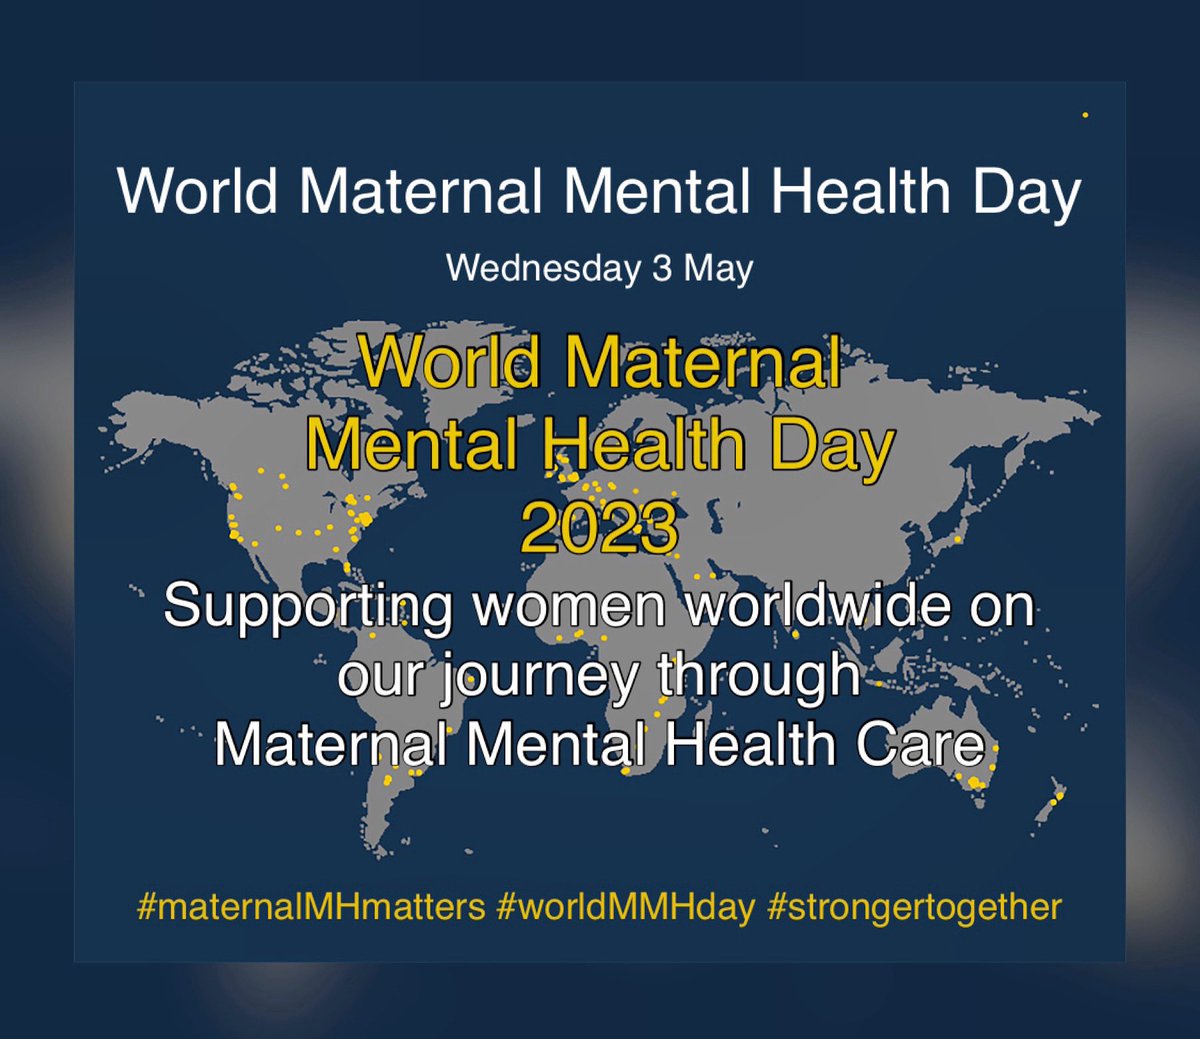 World Maternal Mental Health Day is here!!! There are so many amazing, events, webinars, blogs, fundraisers and Q&A's taking place today in aid of #worldmmhday Head to our website and click the global events page to find an event near you!!! #StrongerTogether #maternalmhmatters